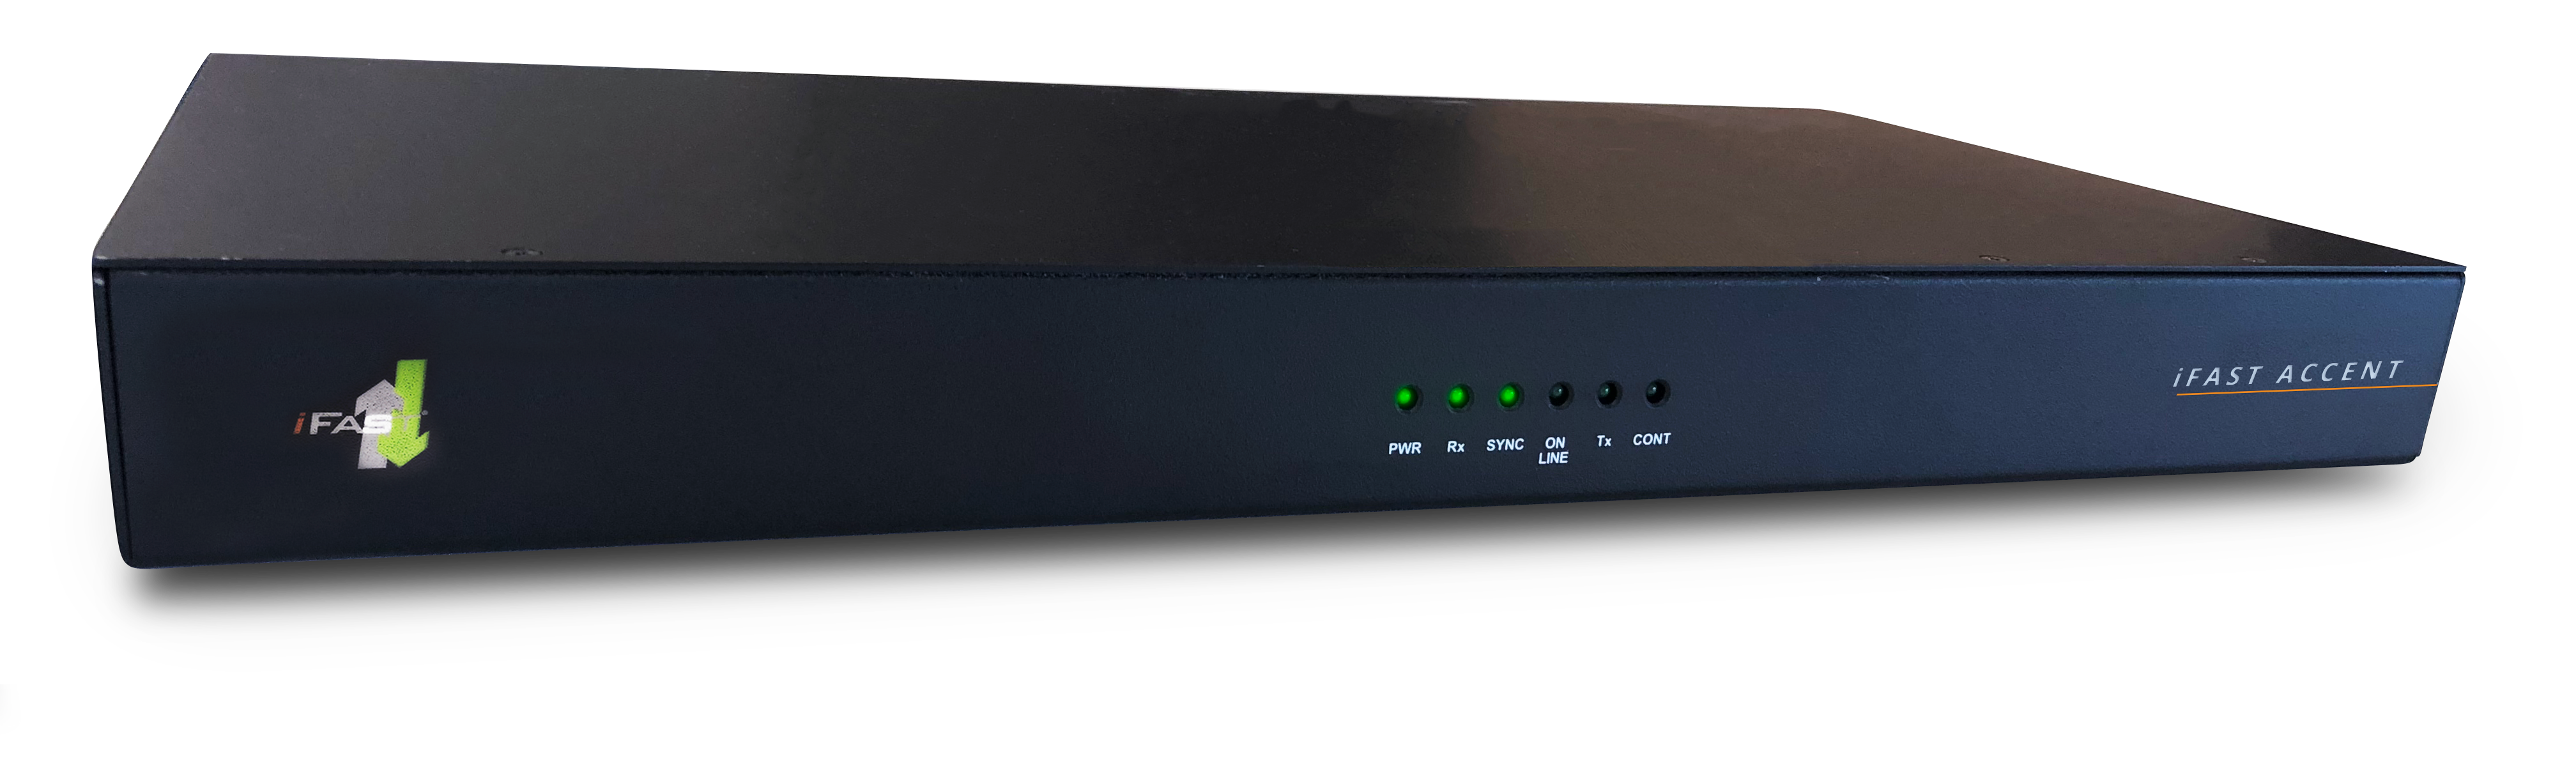 accent-accent-modem-front-with all 3 lights